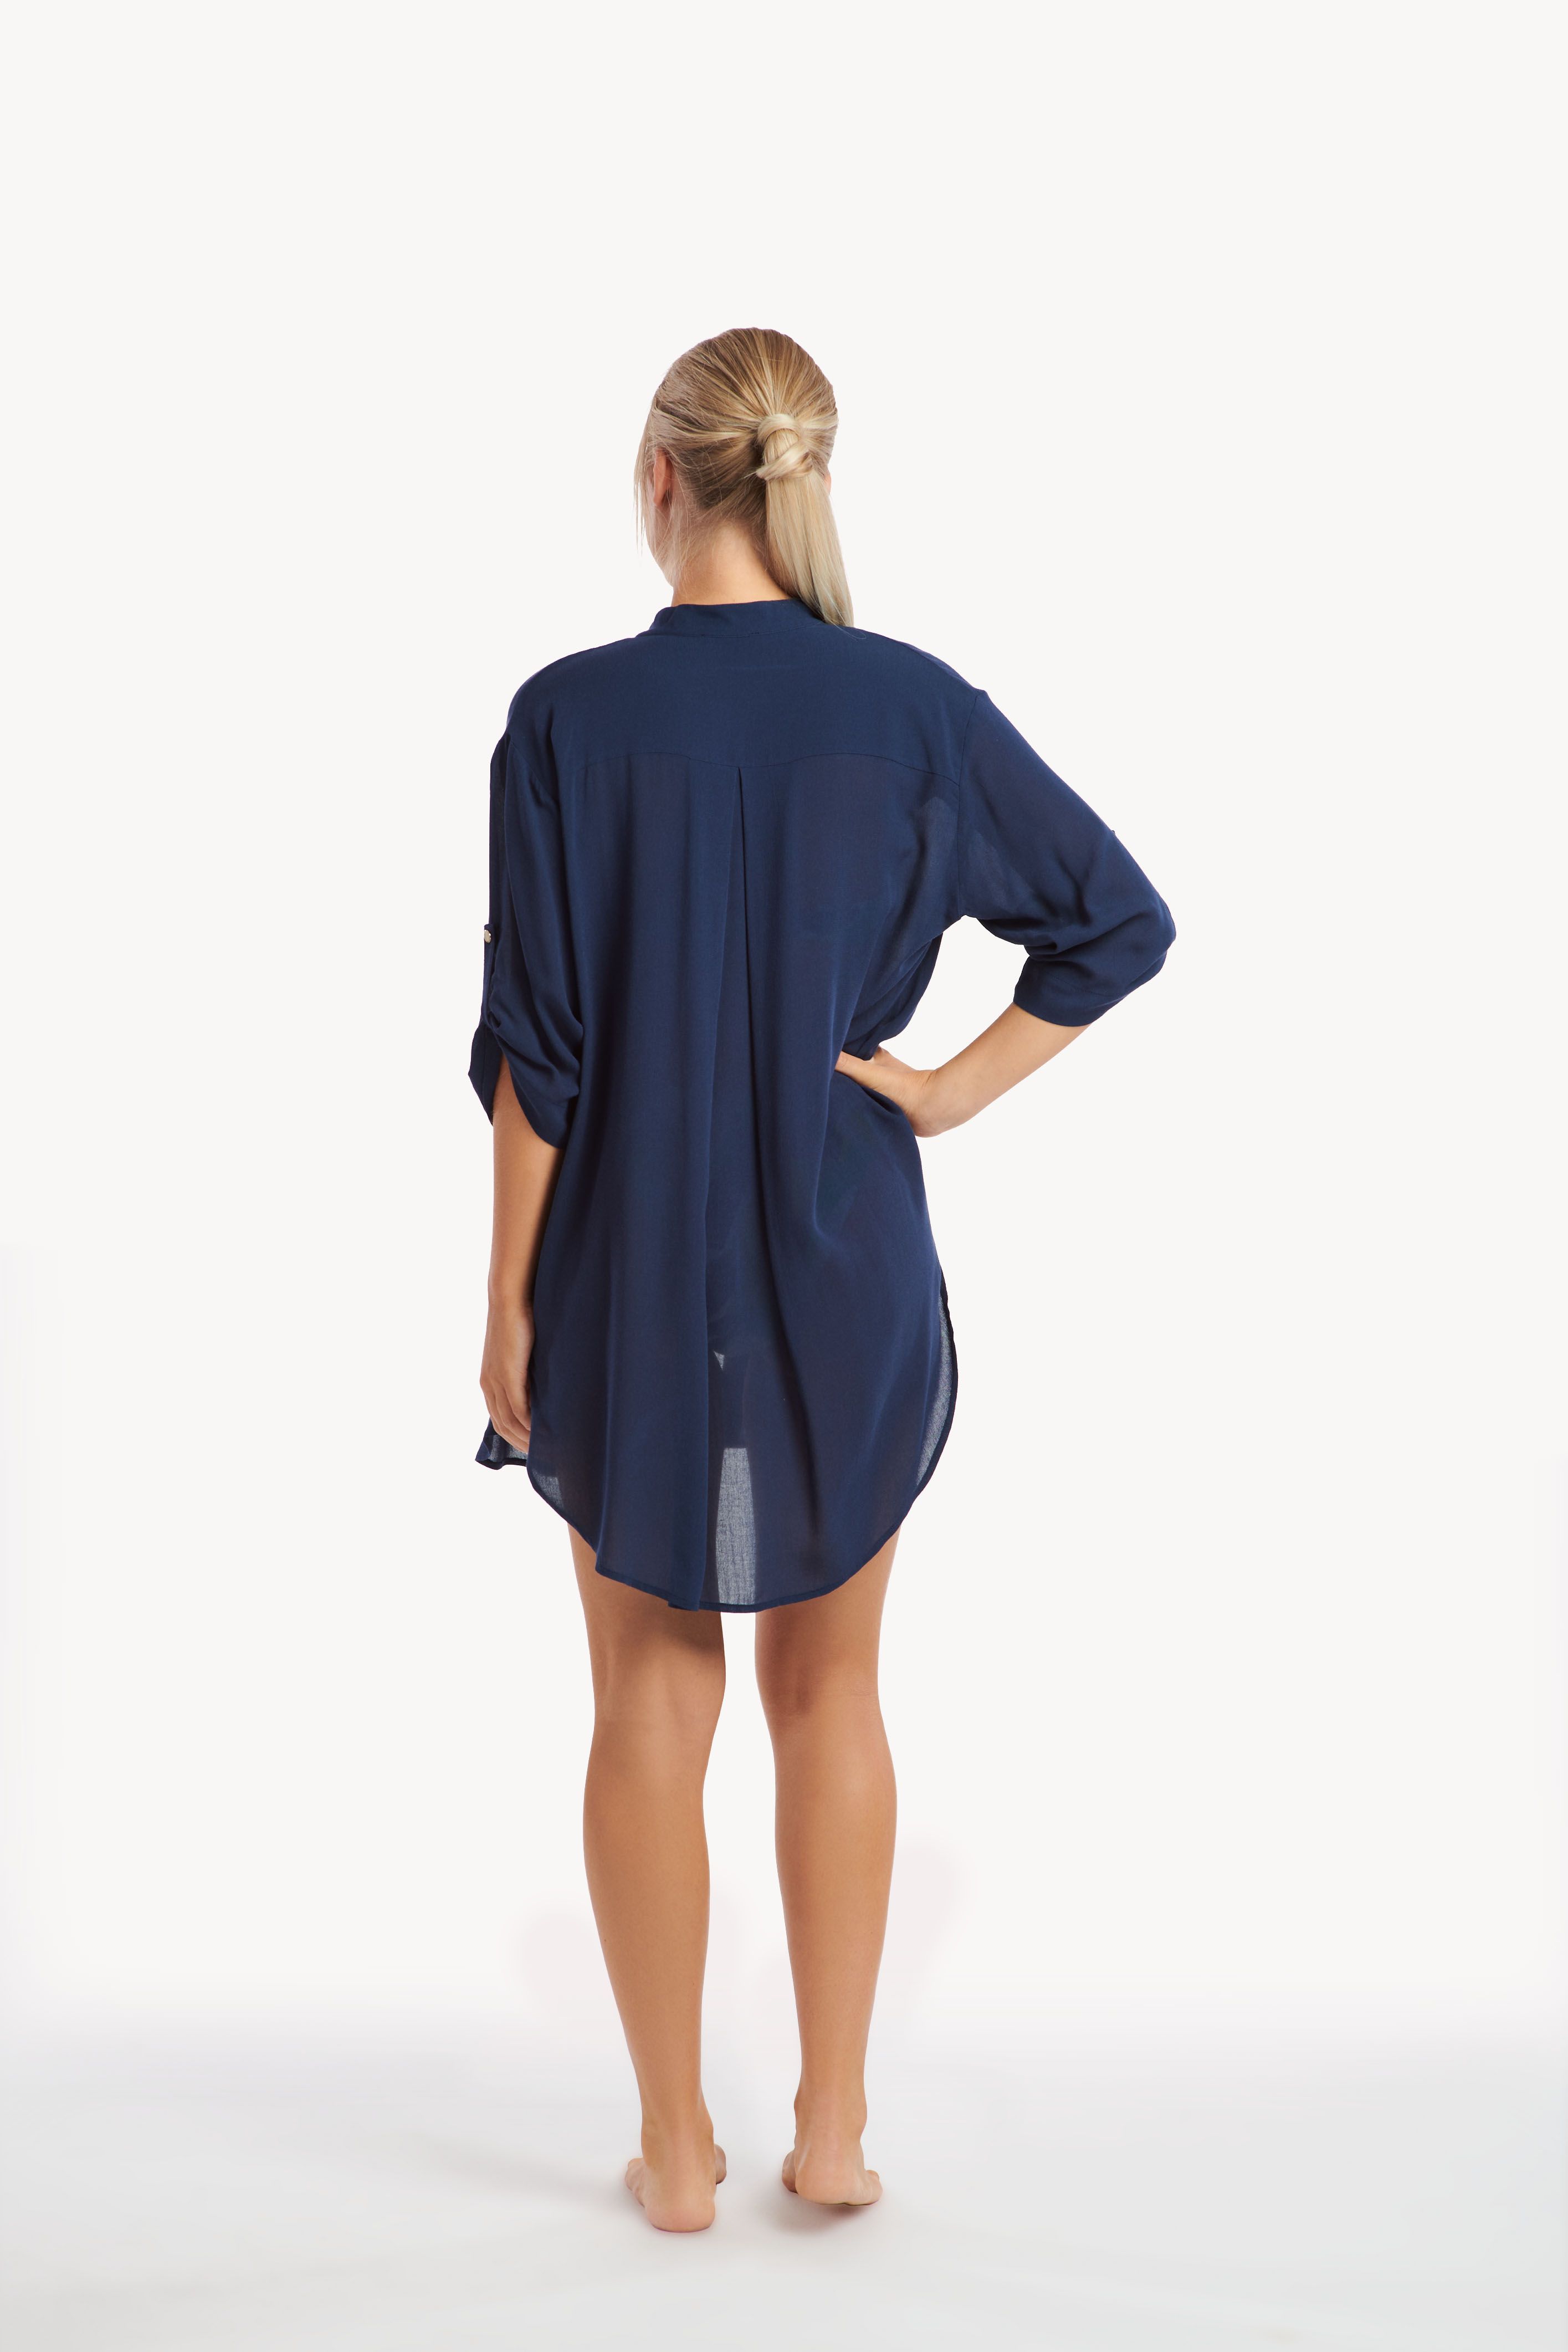 This ¾ length sleeve blouse from the Lisca ‘Panama’ range is modern and comfortable. Features front buttoning, slits in the side seams and is loose-fitting for optimum comfort.